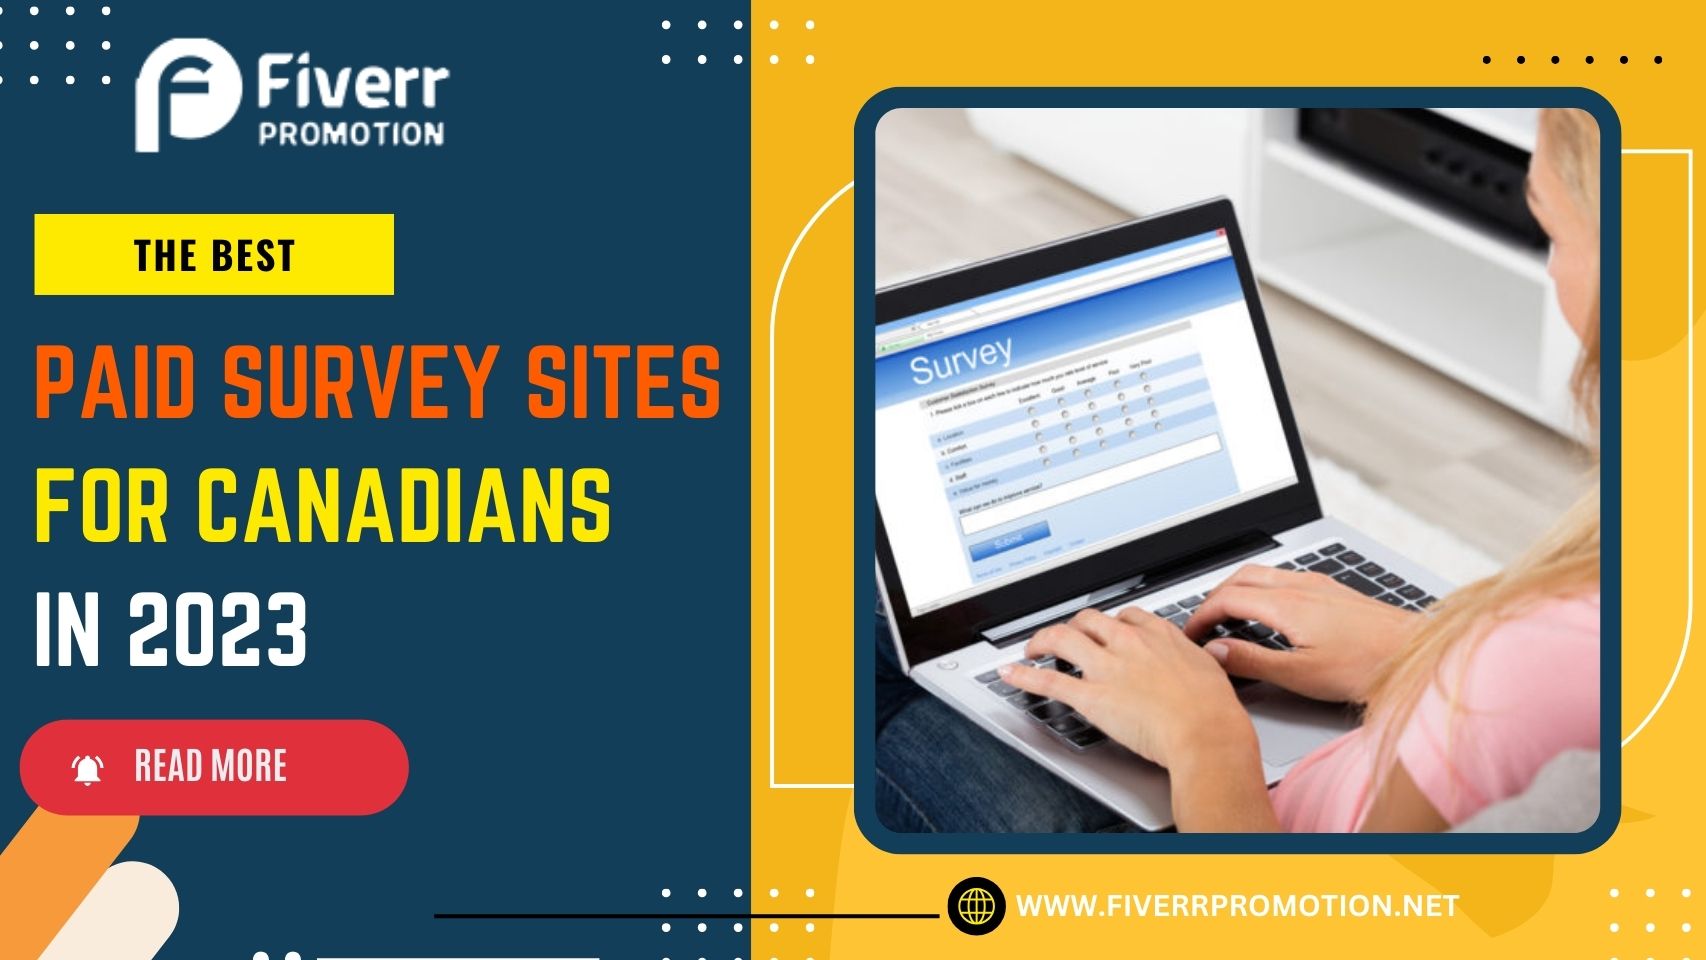 The Best Paid Survey Sites for Canadians in 2023